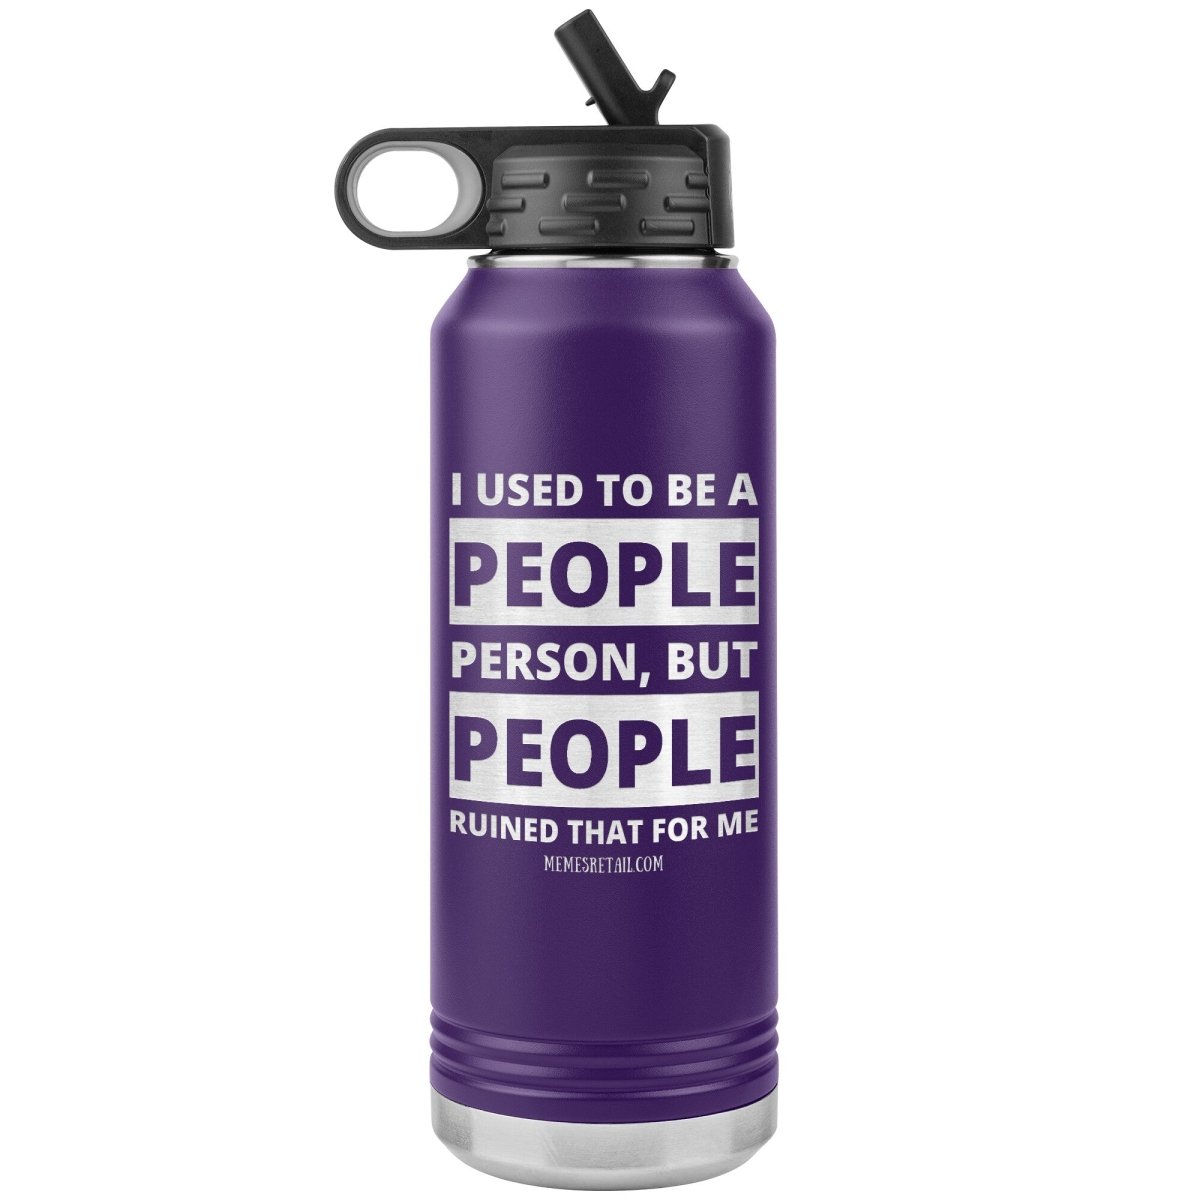 I Used To Be A People Person, But People Ruined That For Me 32 oz Water Tumbler, Purple - MemesRetail.com